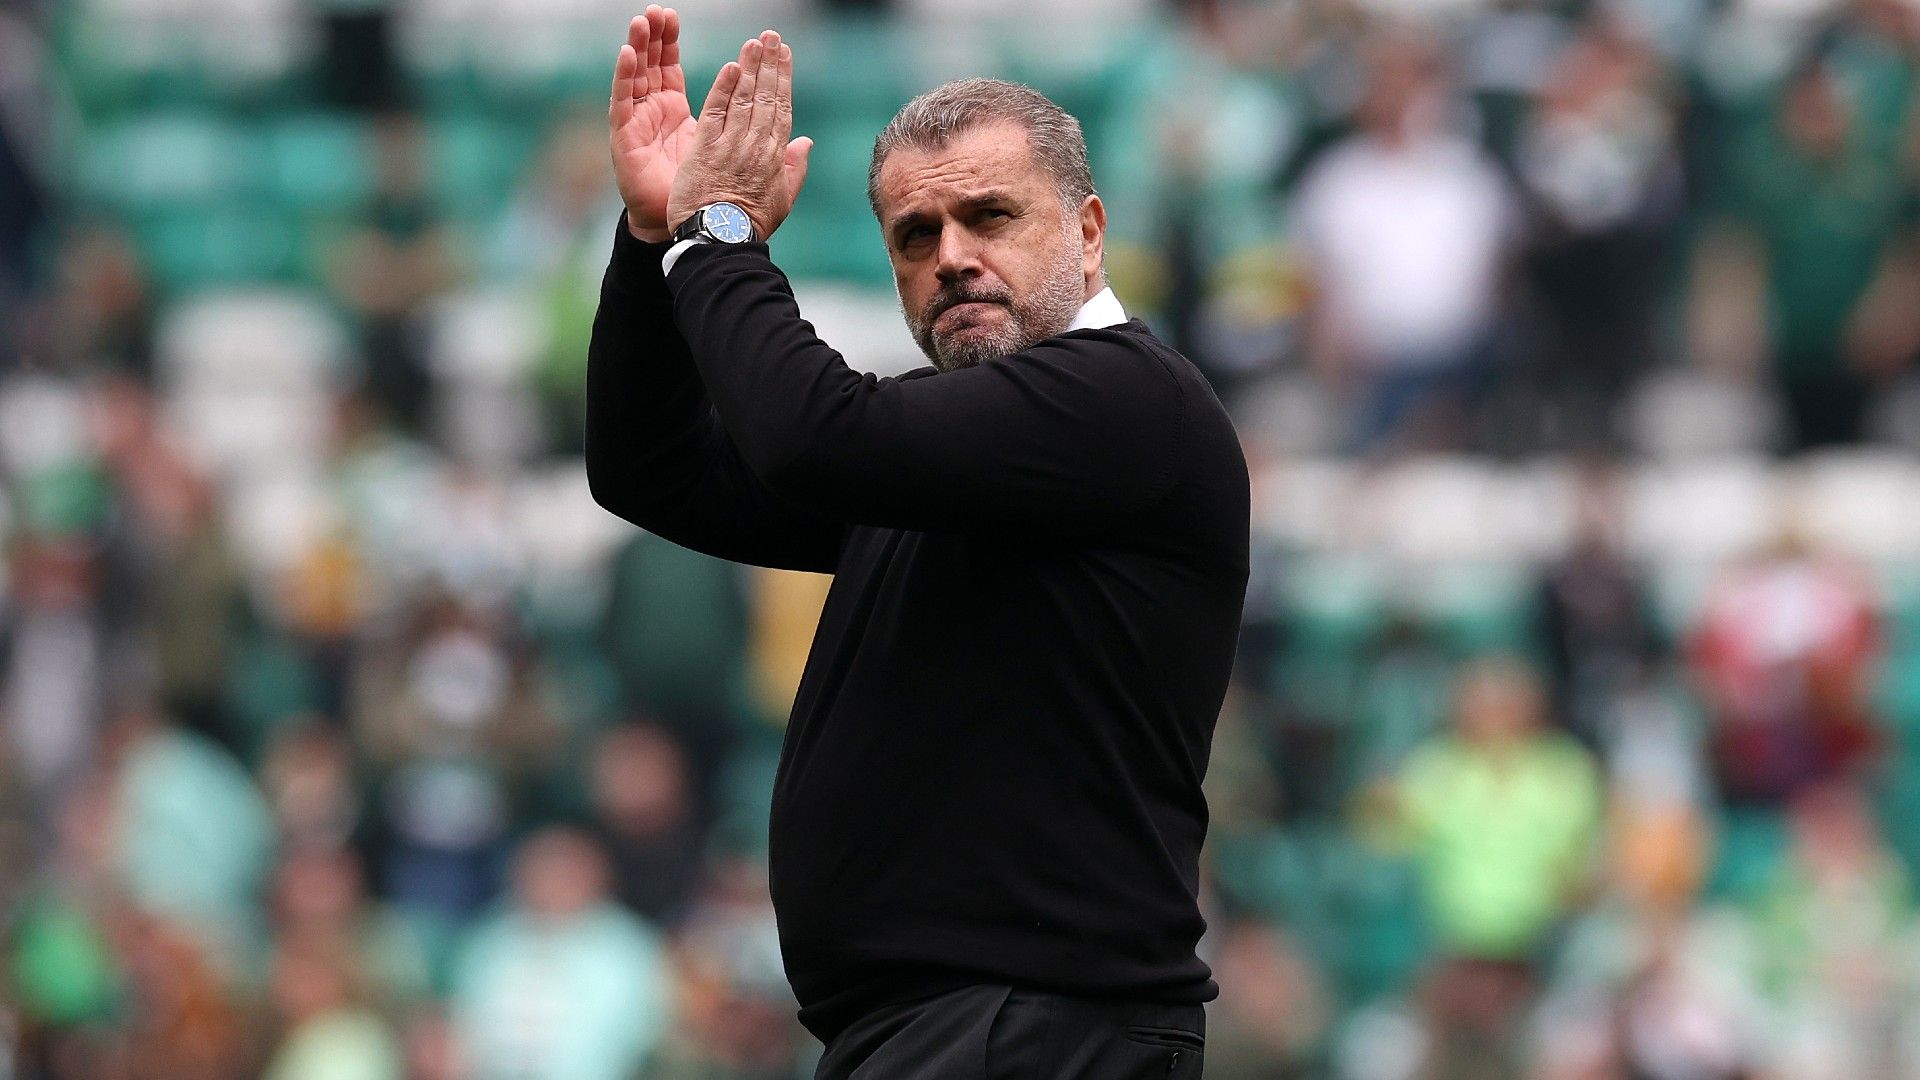 Ange Postecoglou says haters aren't driving him after prestigious award for Celtic